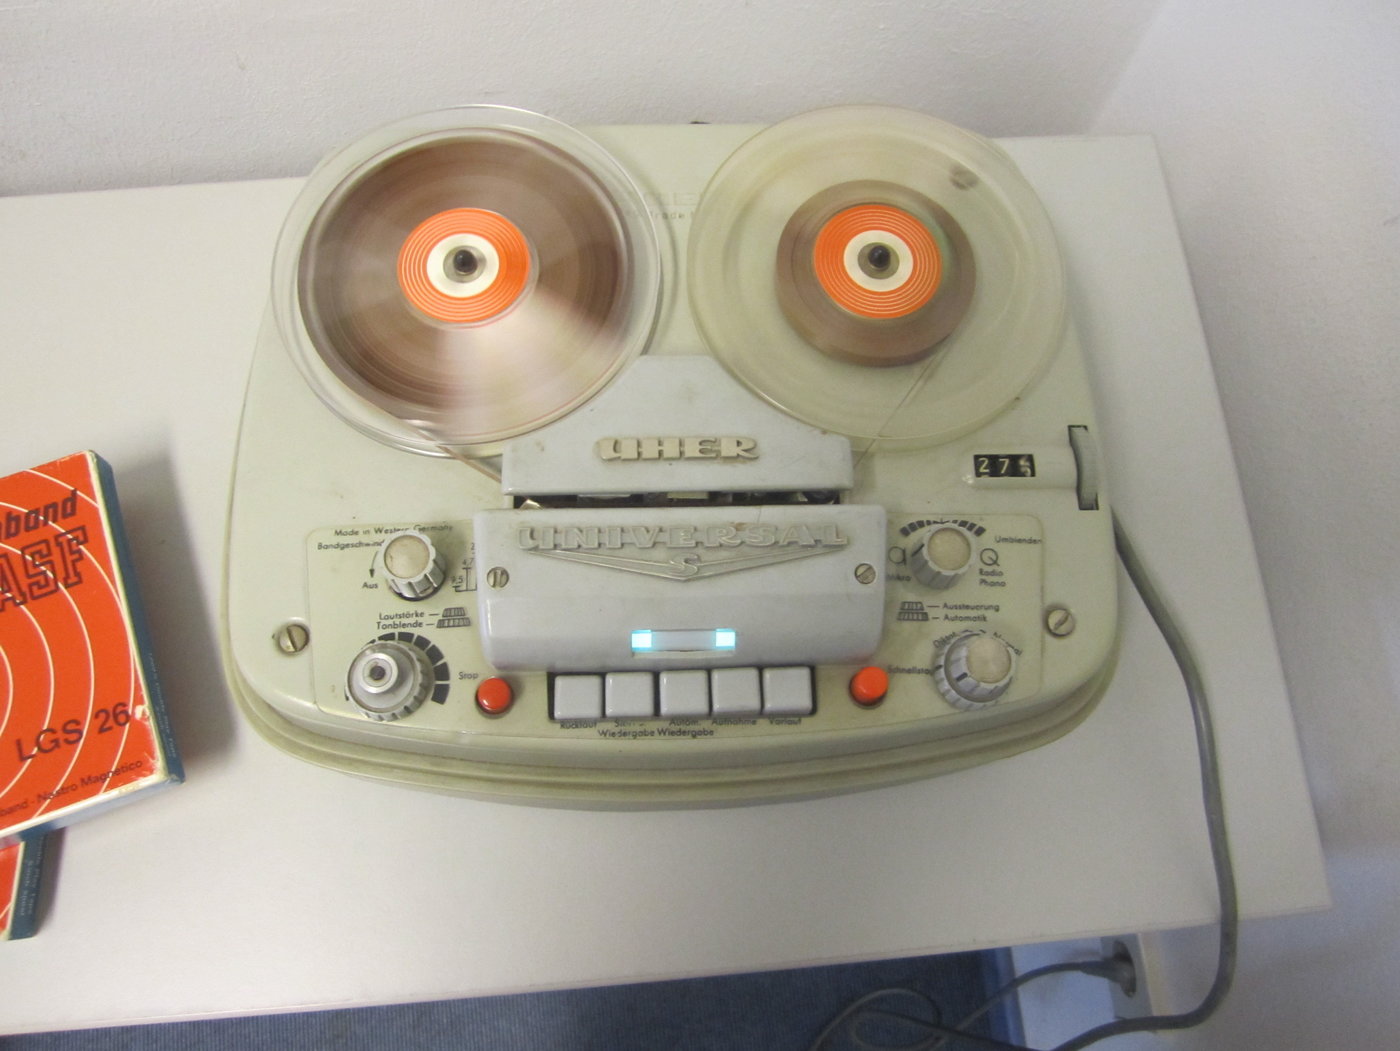 Image of a tape recorder of the type used by the BOLSA project for voice recordings